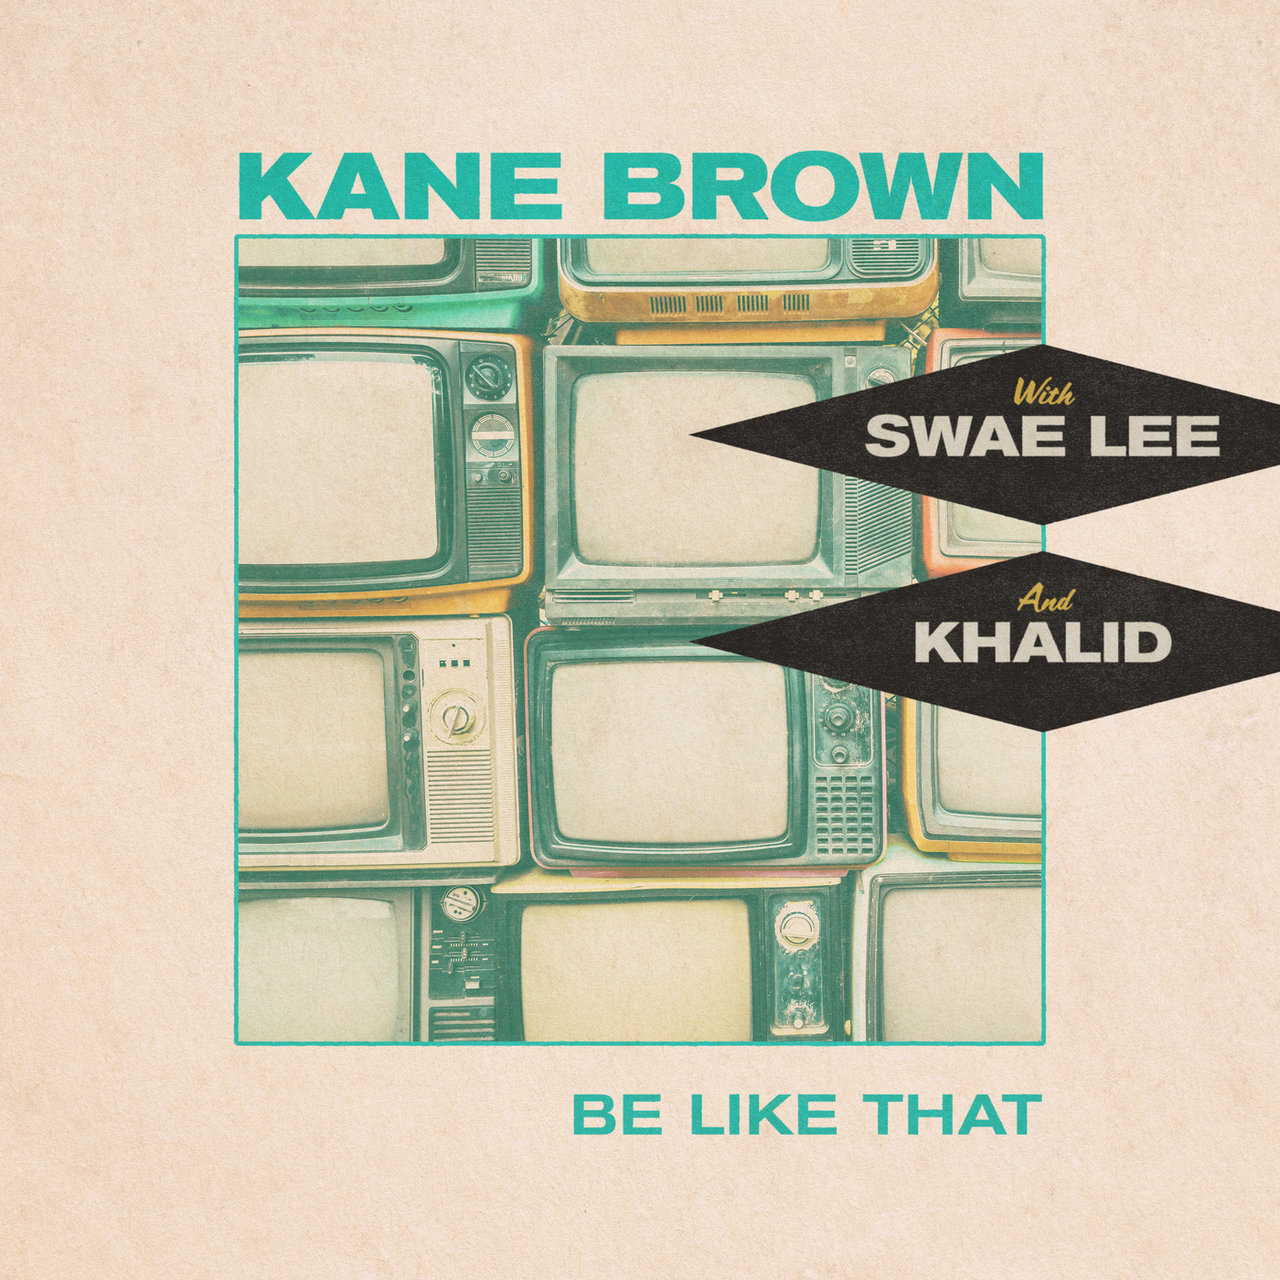 Kane Brown - Be Like That (ft. Swae Lee and Khalid) (Cover)